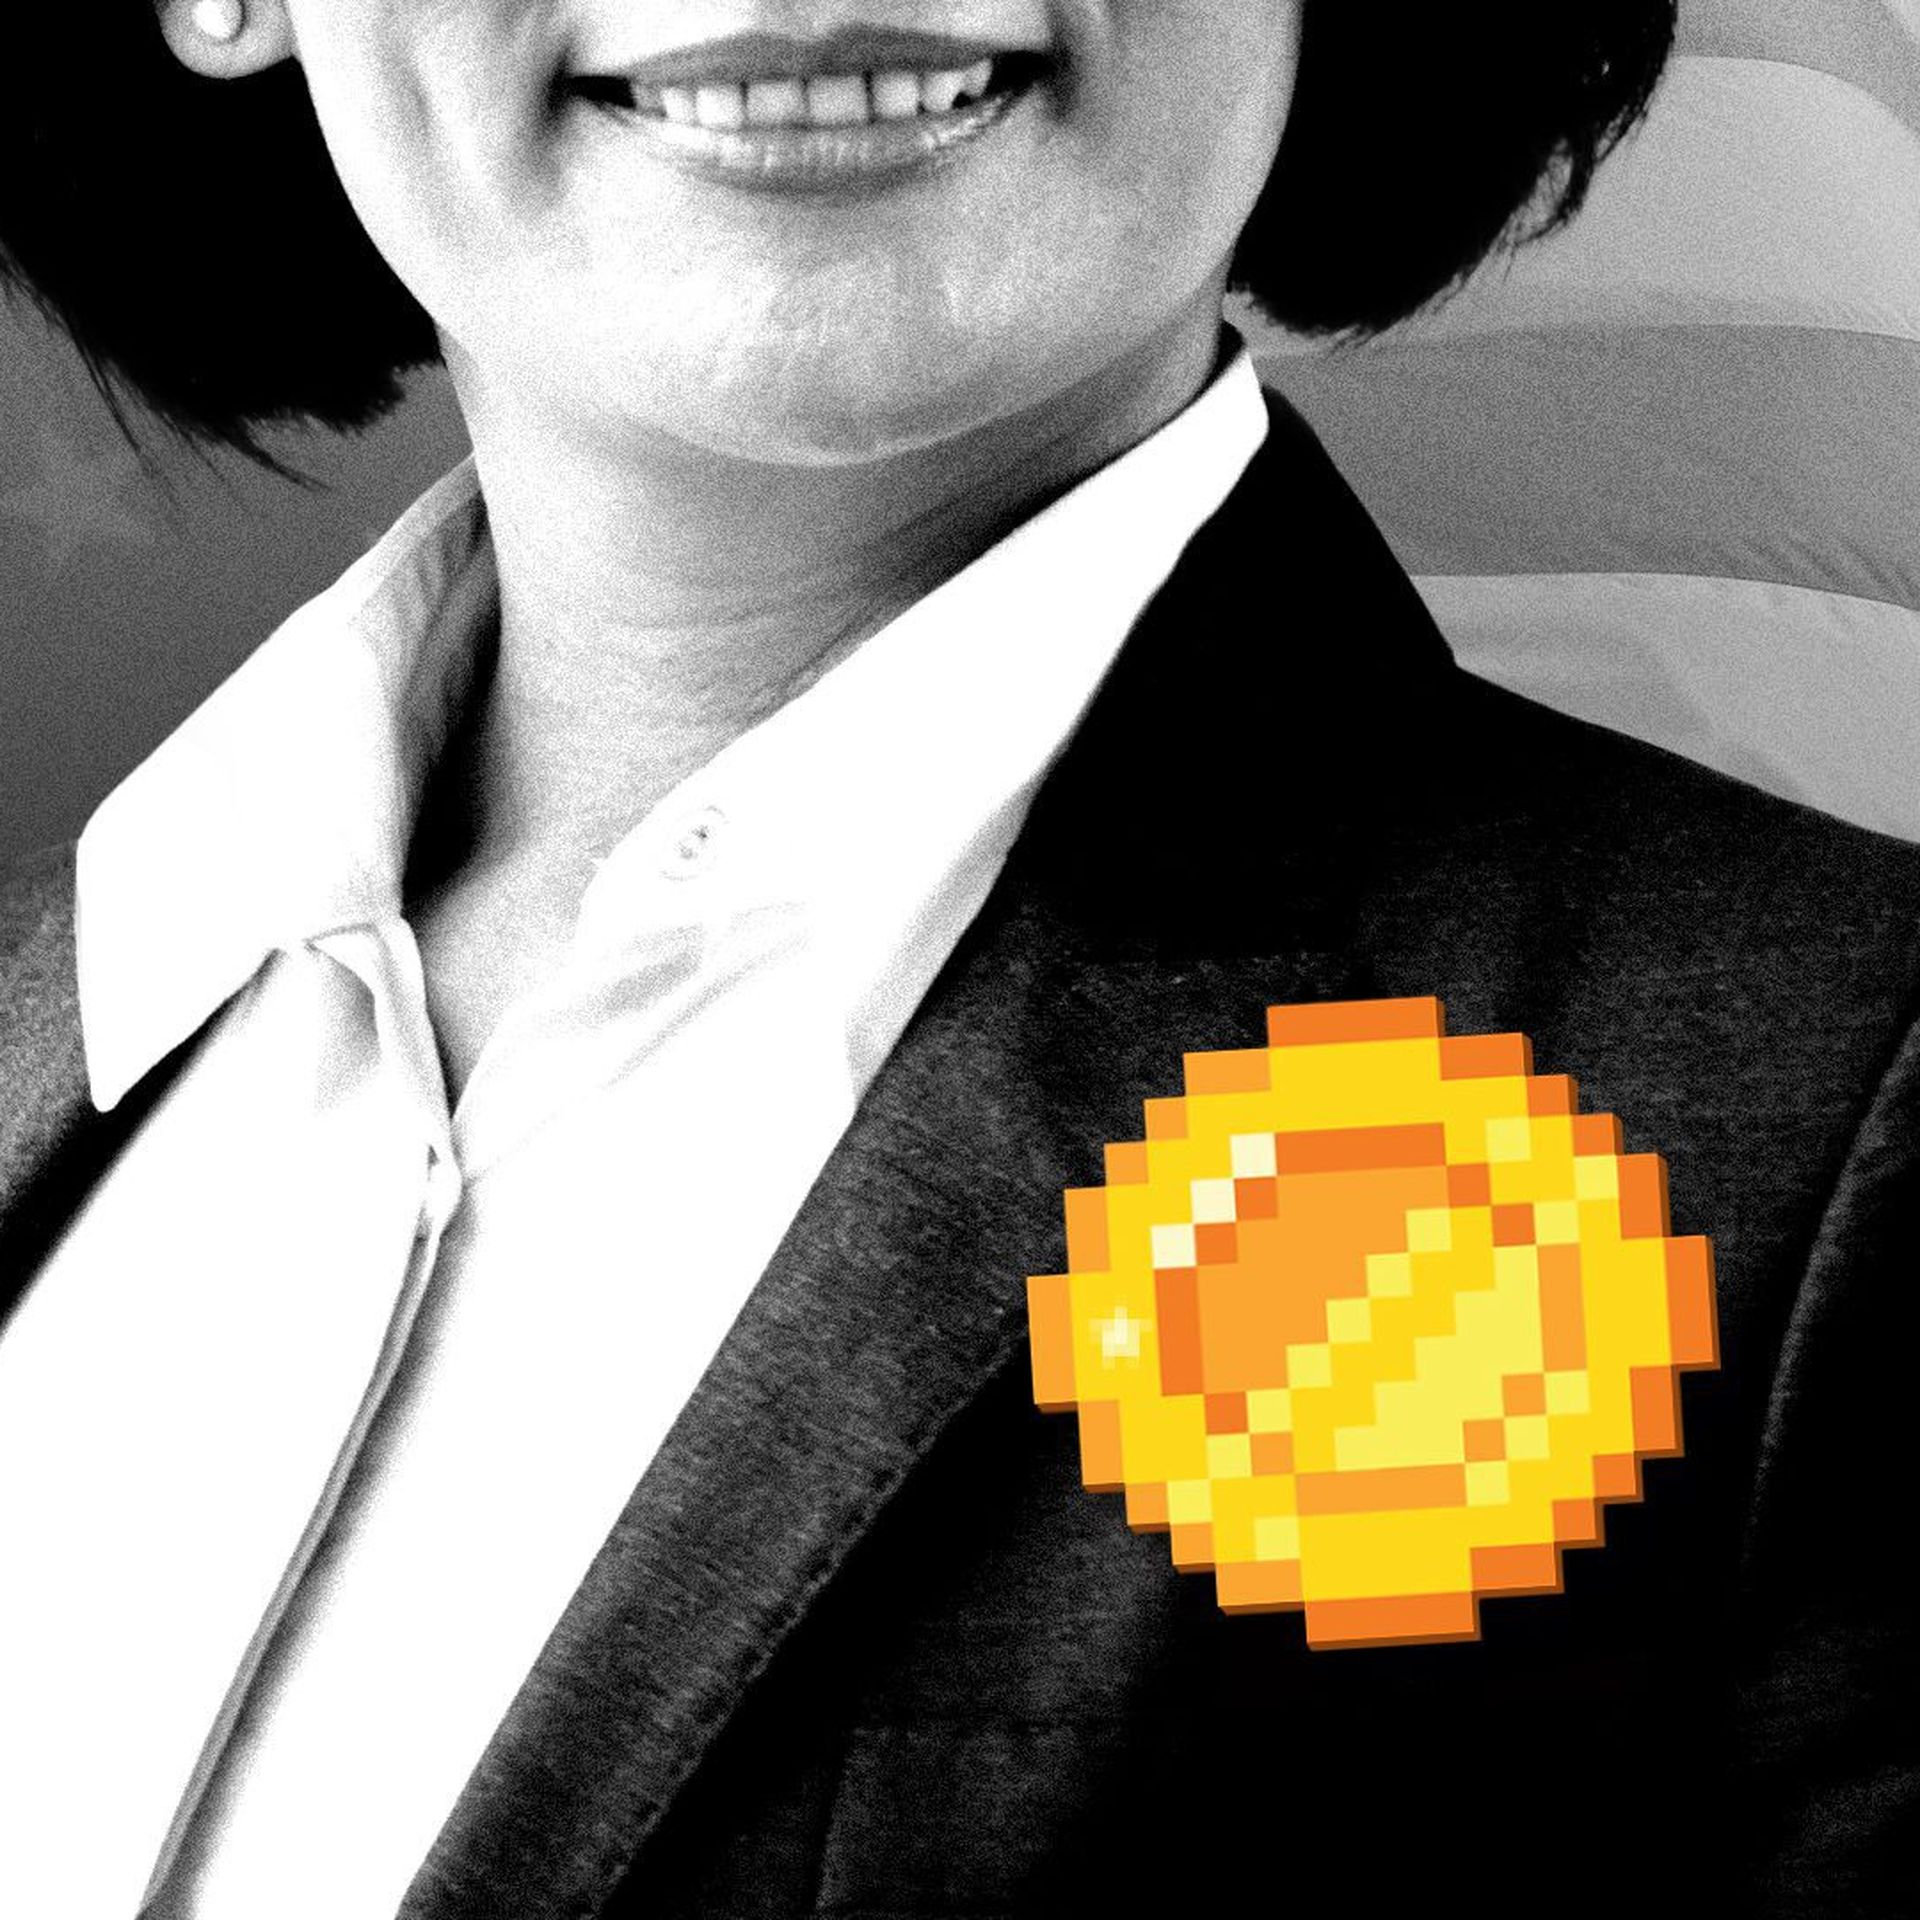 A woman in a suit with a digital coin on her lapel.